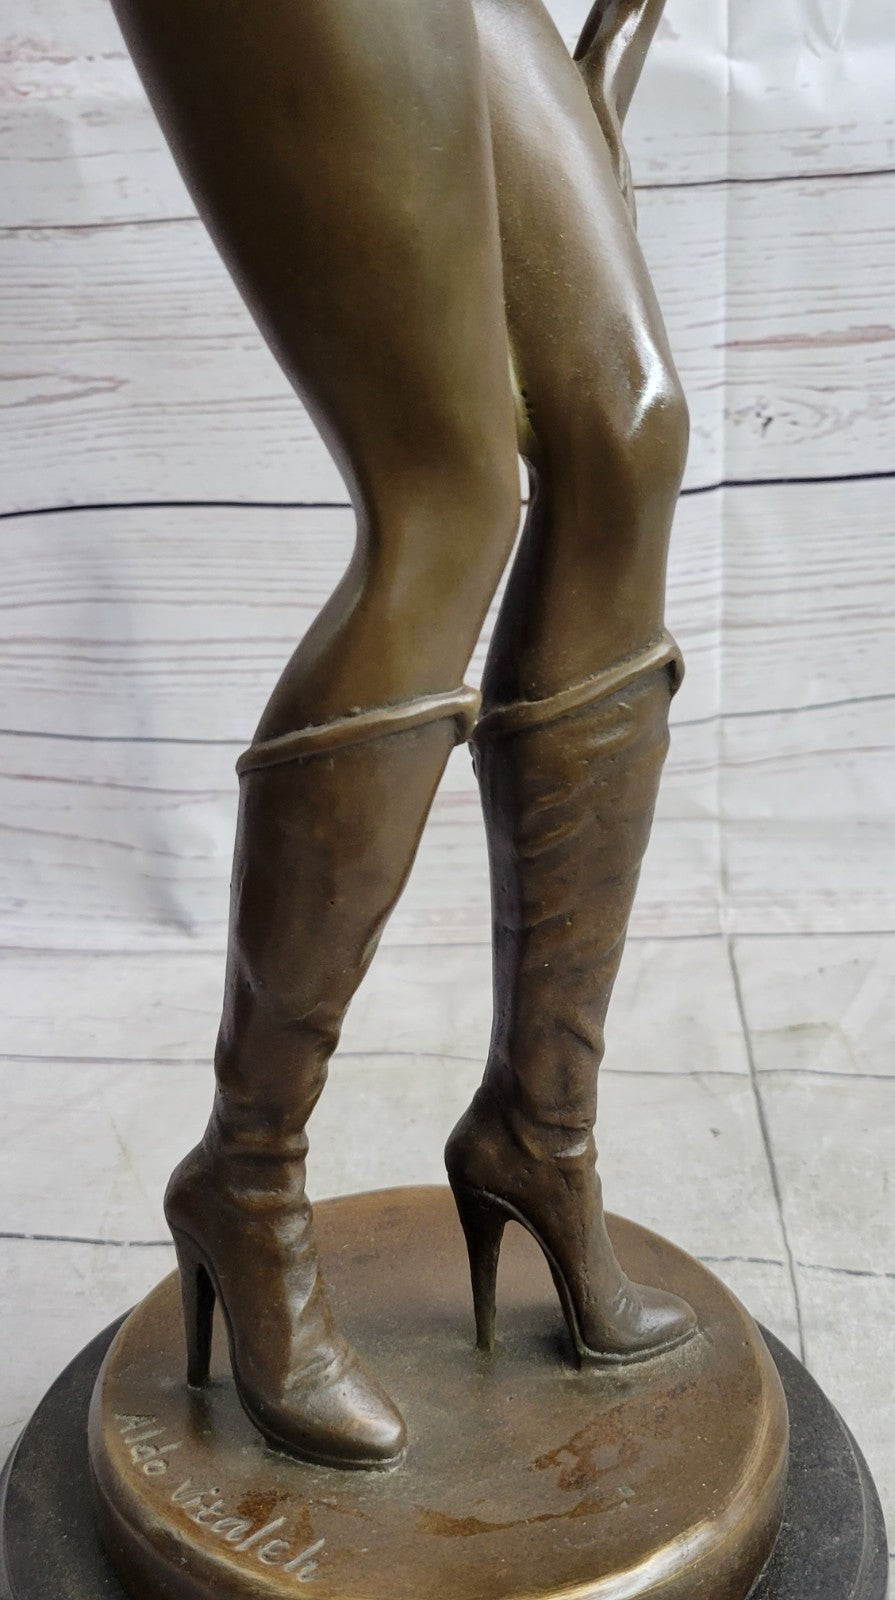 Provocative Vitaleh Bronze Figurine: Sexy Woman with Bikini and Boots, Signed Hot Cast Sculpture